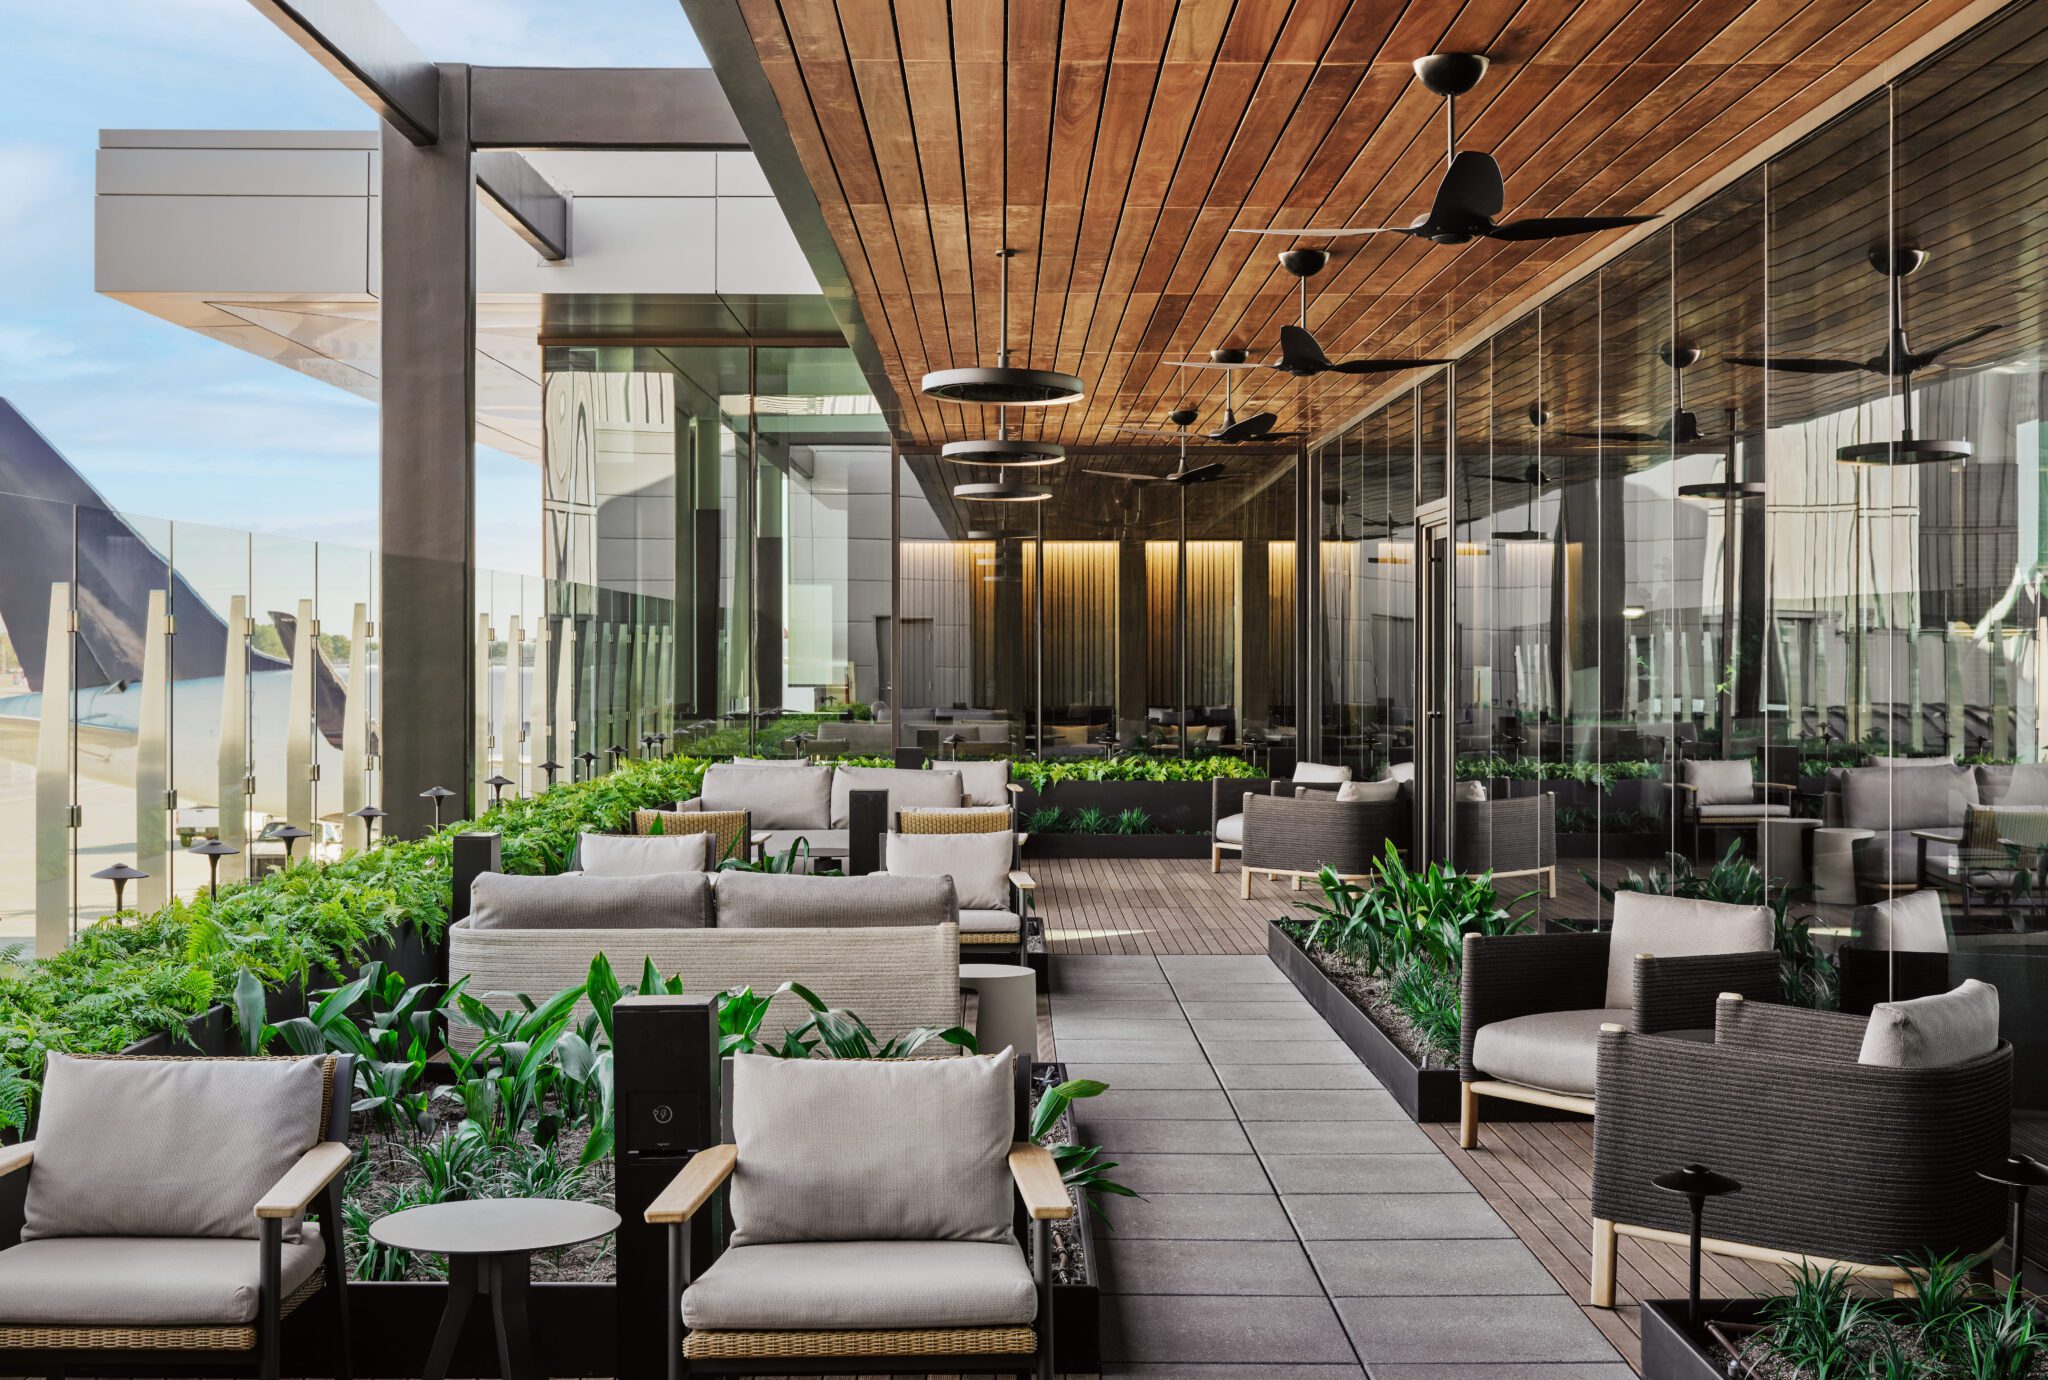 World’s Biggest American Express Centurion Lounge Opens Today: Here’s A Look Inside